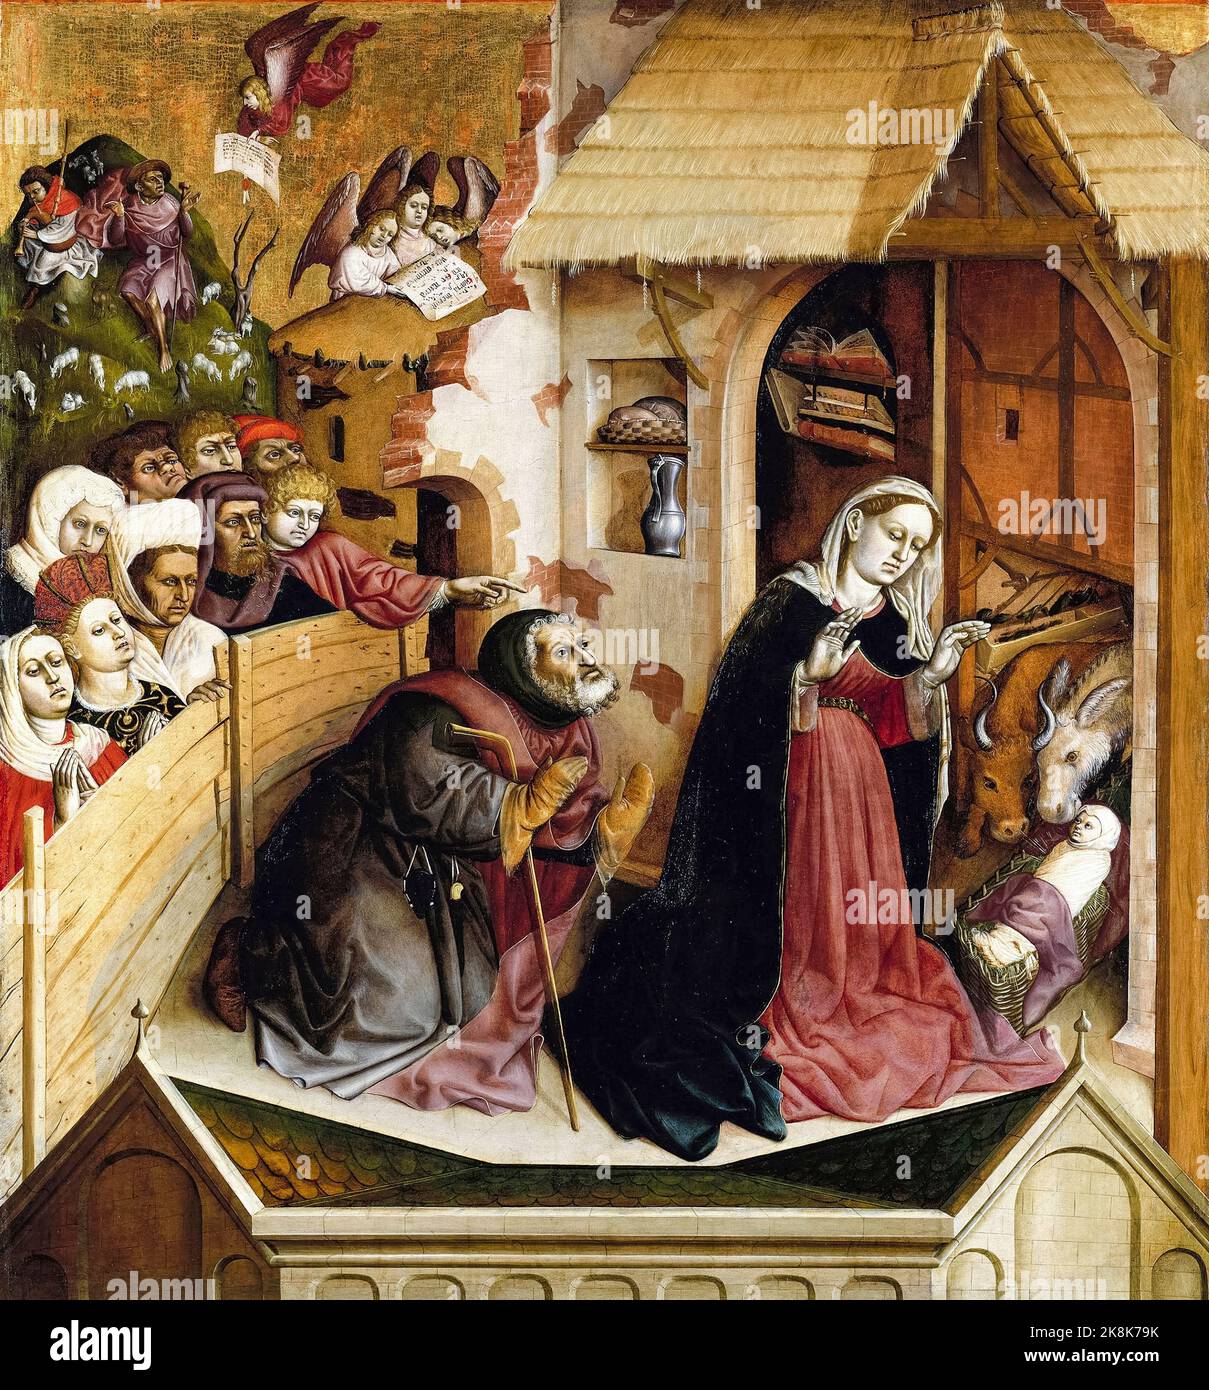 The Birth of Jesus Christ (The Nativity), The Wings of the Wurzach Altar, painting in oil on wood by Hans Multscher, 1437 Stock Photo